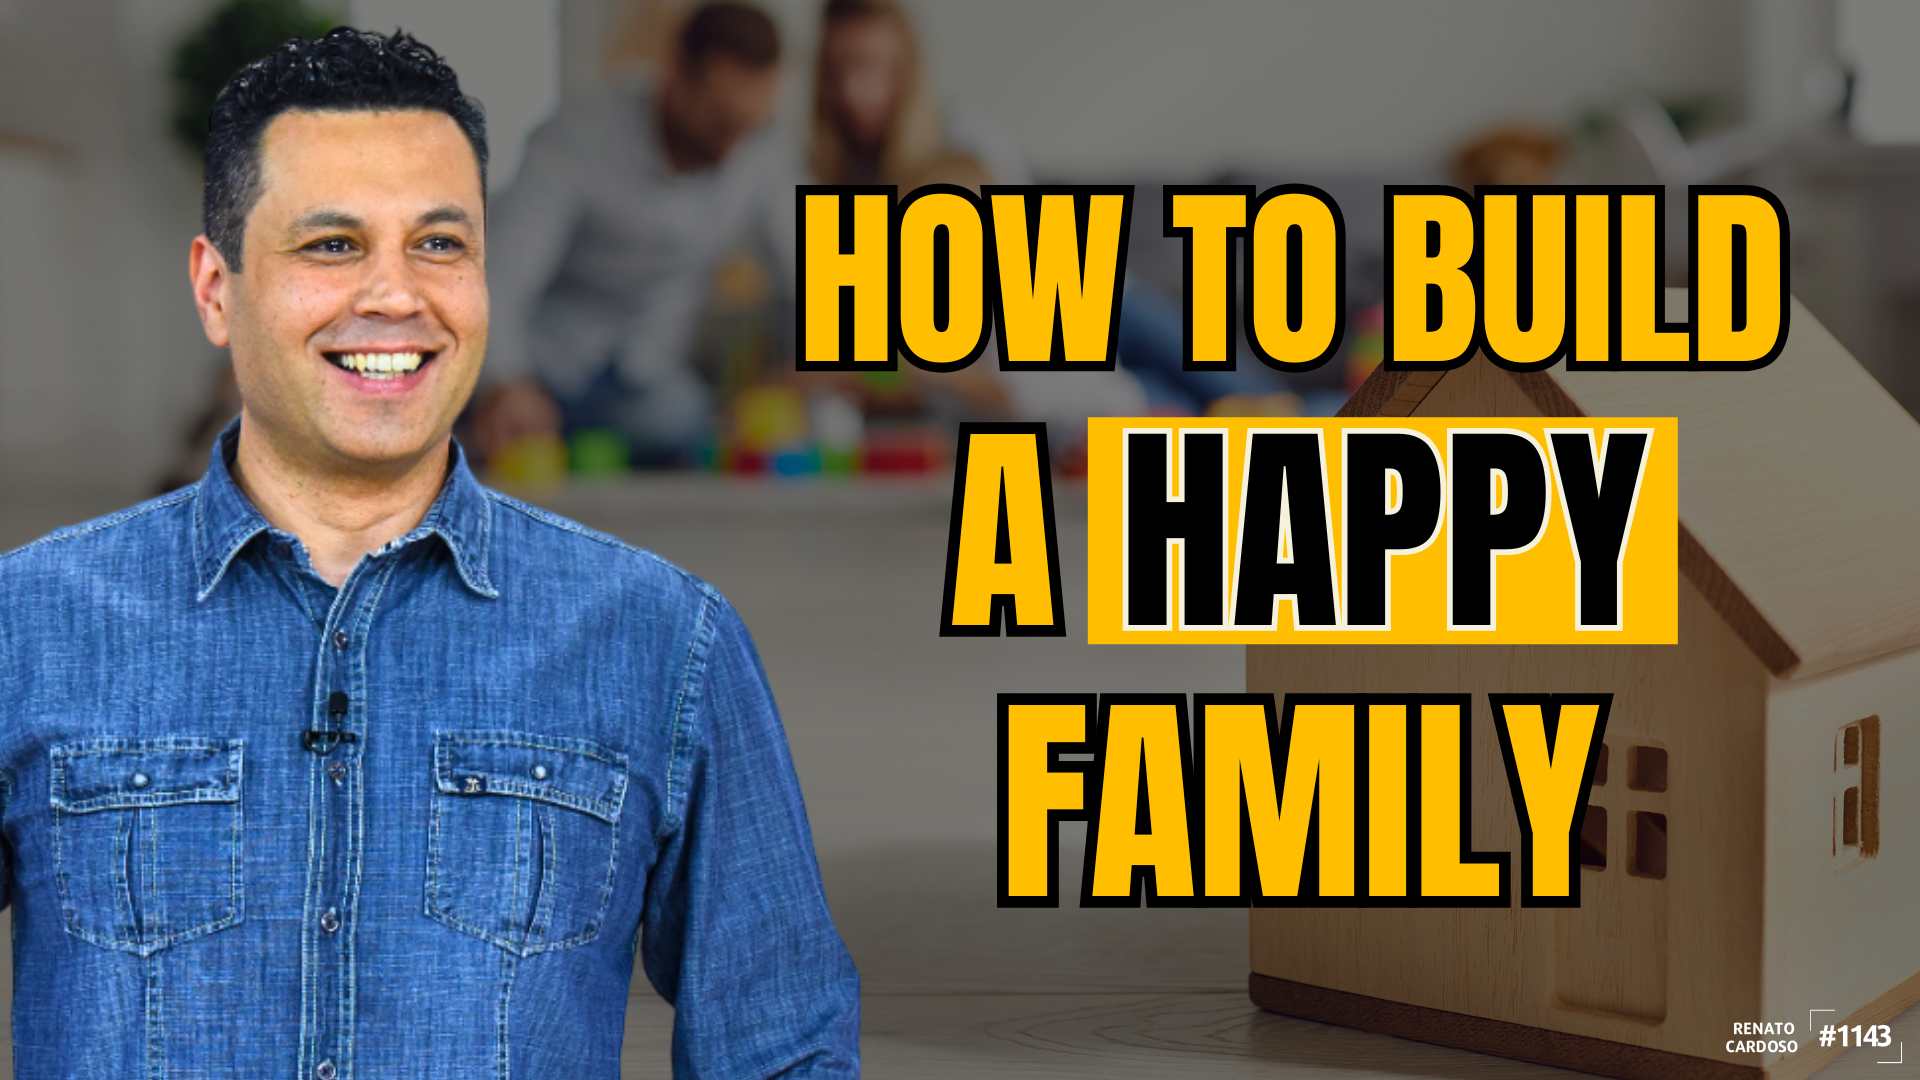 1143_HOW TO BUILD A HAPPY FAMILY _ #1143.docx